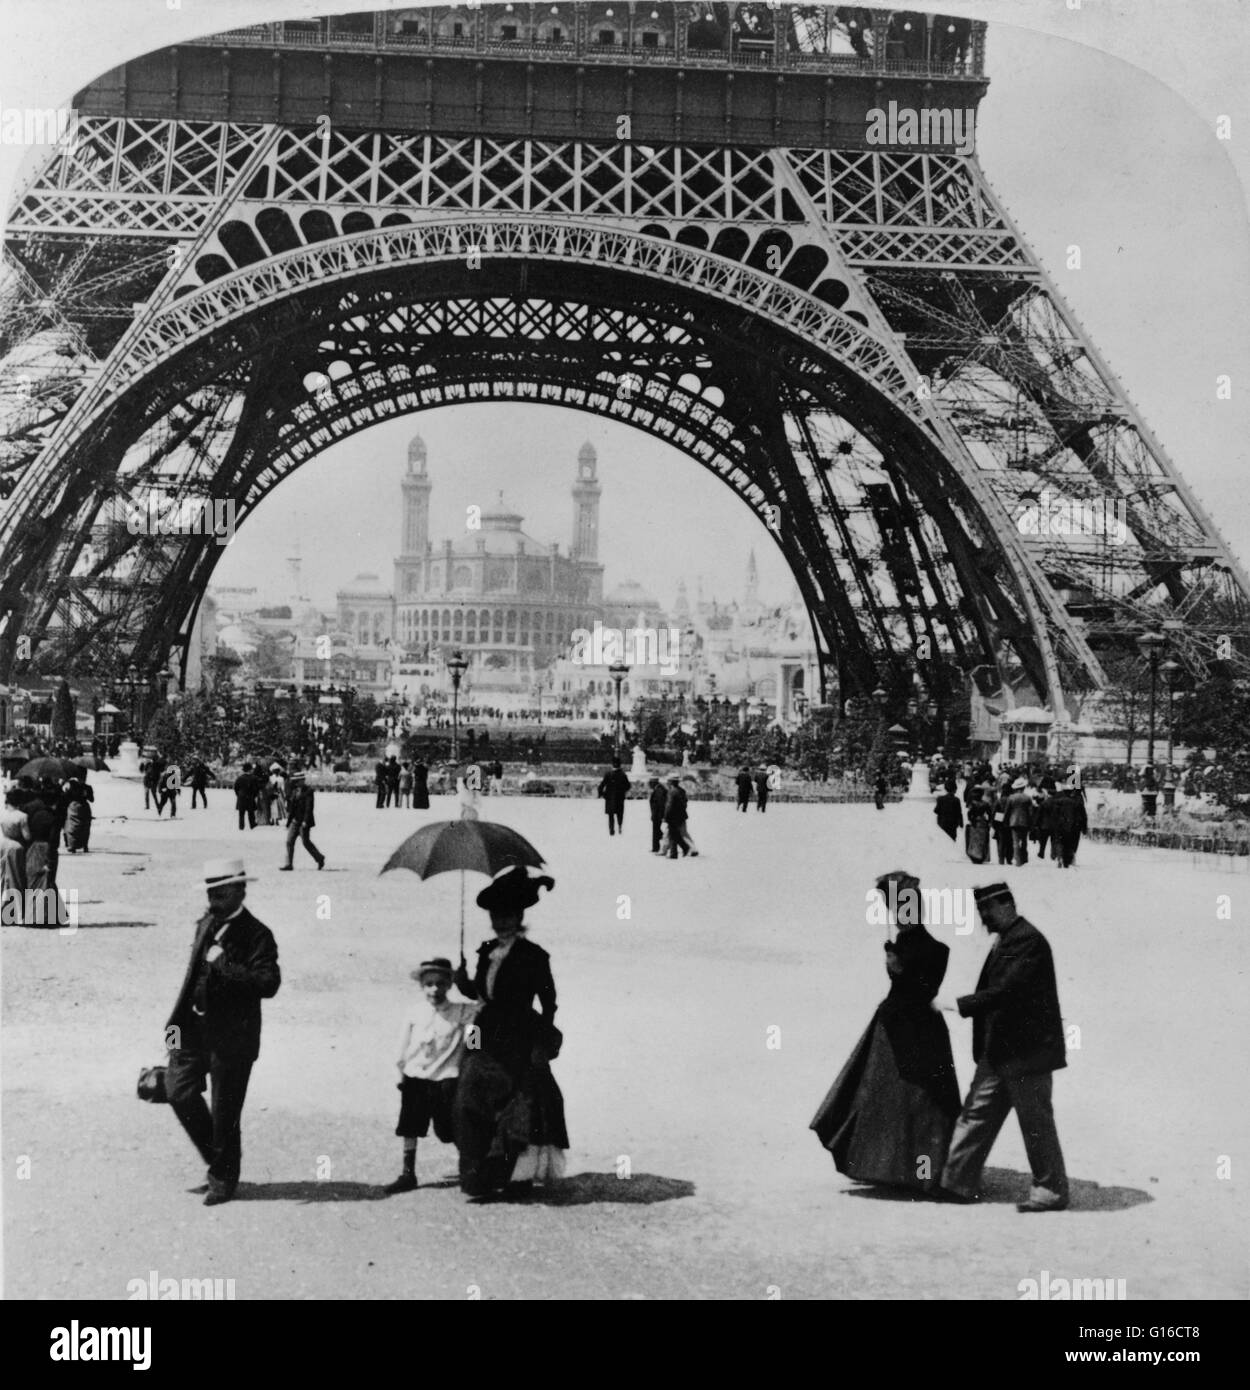 Underwood & Underwood stereograph card looking through Eiffel Tower to the Trocadero and Colonial Section, Exposition 1900. The Exposition Universelle of 1900 was a world's fair held in Paris, France, to celebrate the achievements of the past century and Stock Photo